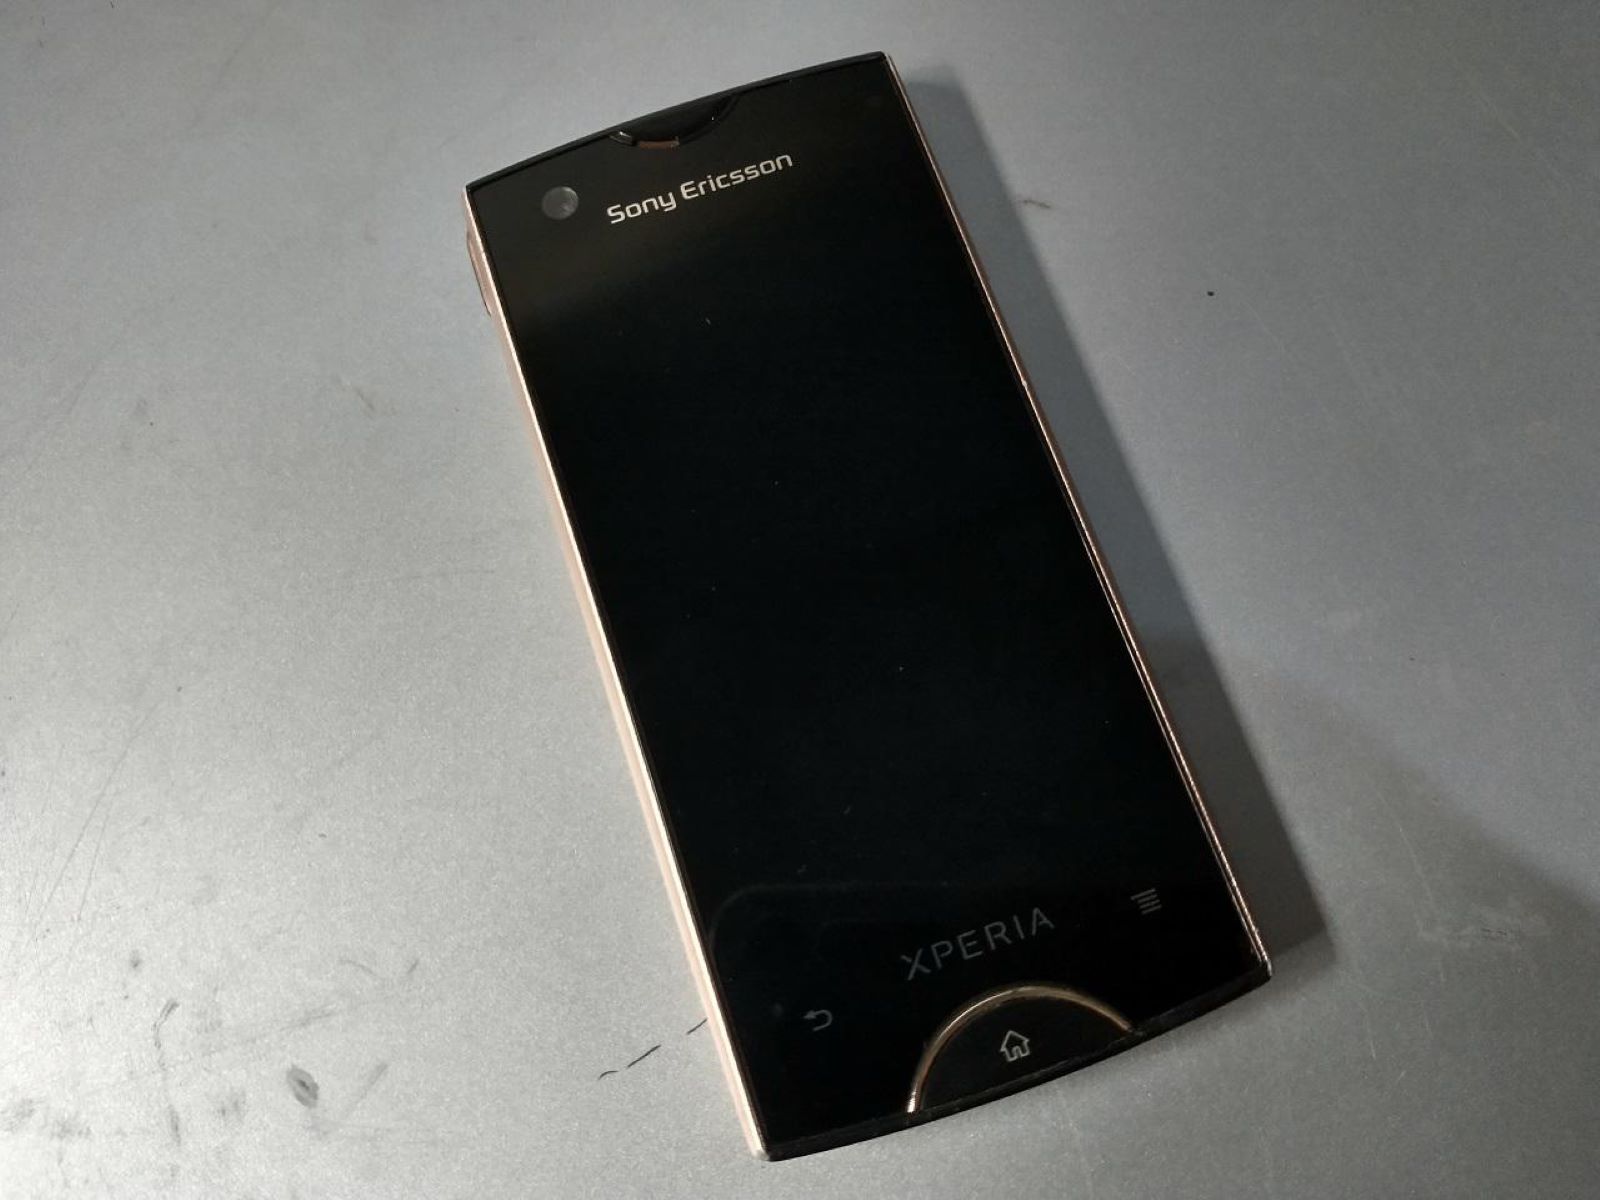 updating-sony-ericsson-xperia-ray-a-step-by-step-guide